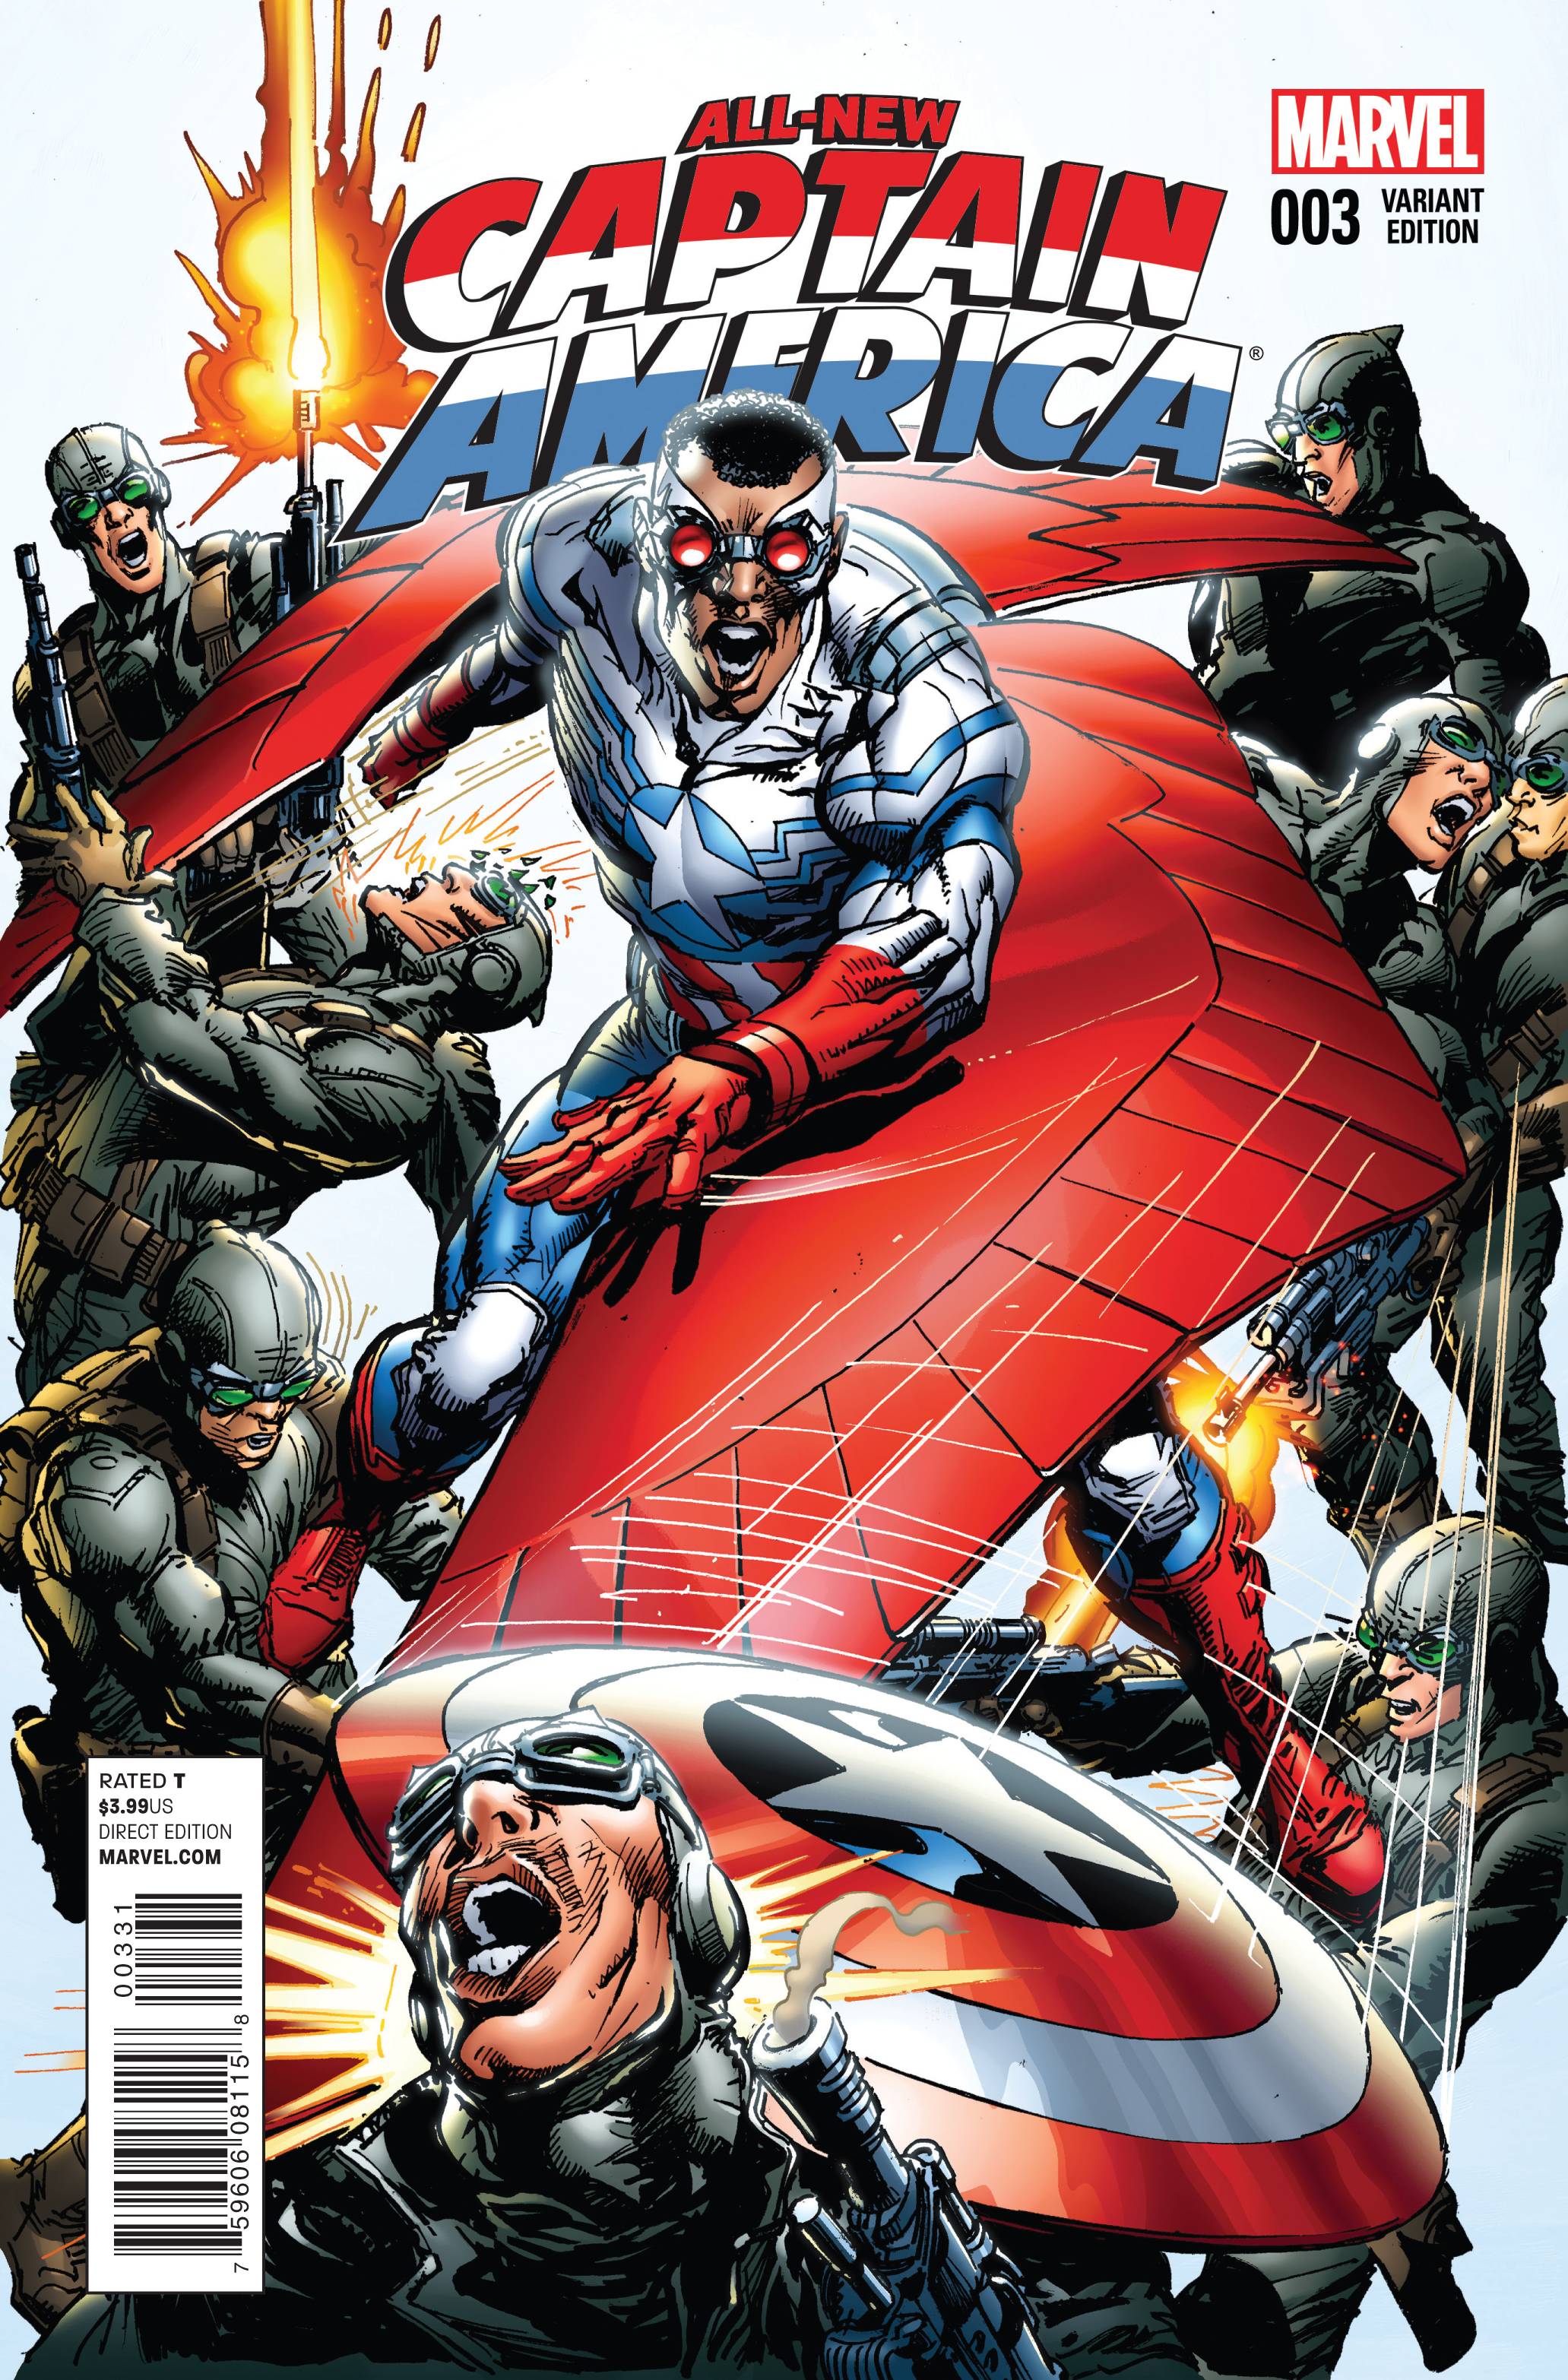 All New Captain America #3 1 for 25 Incentive Neal Adams